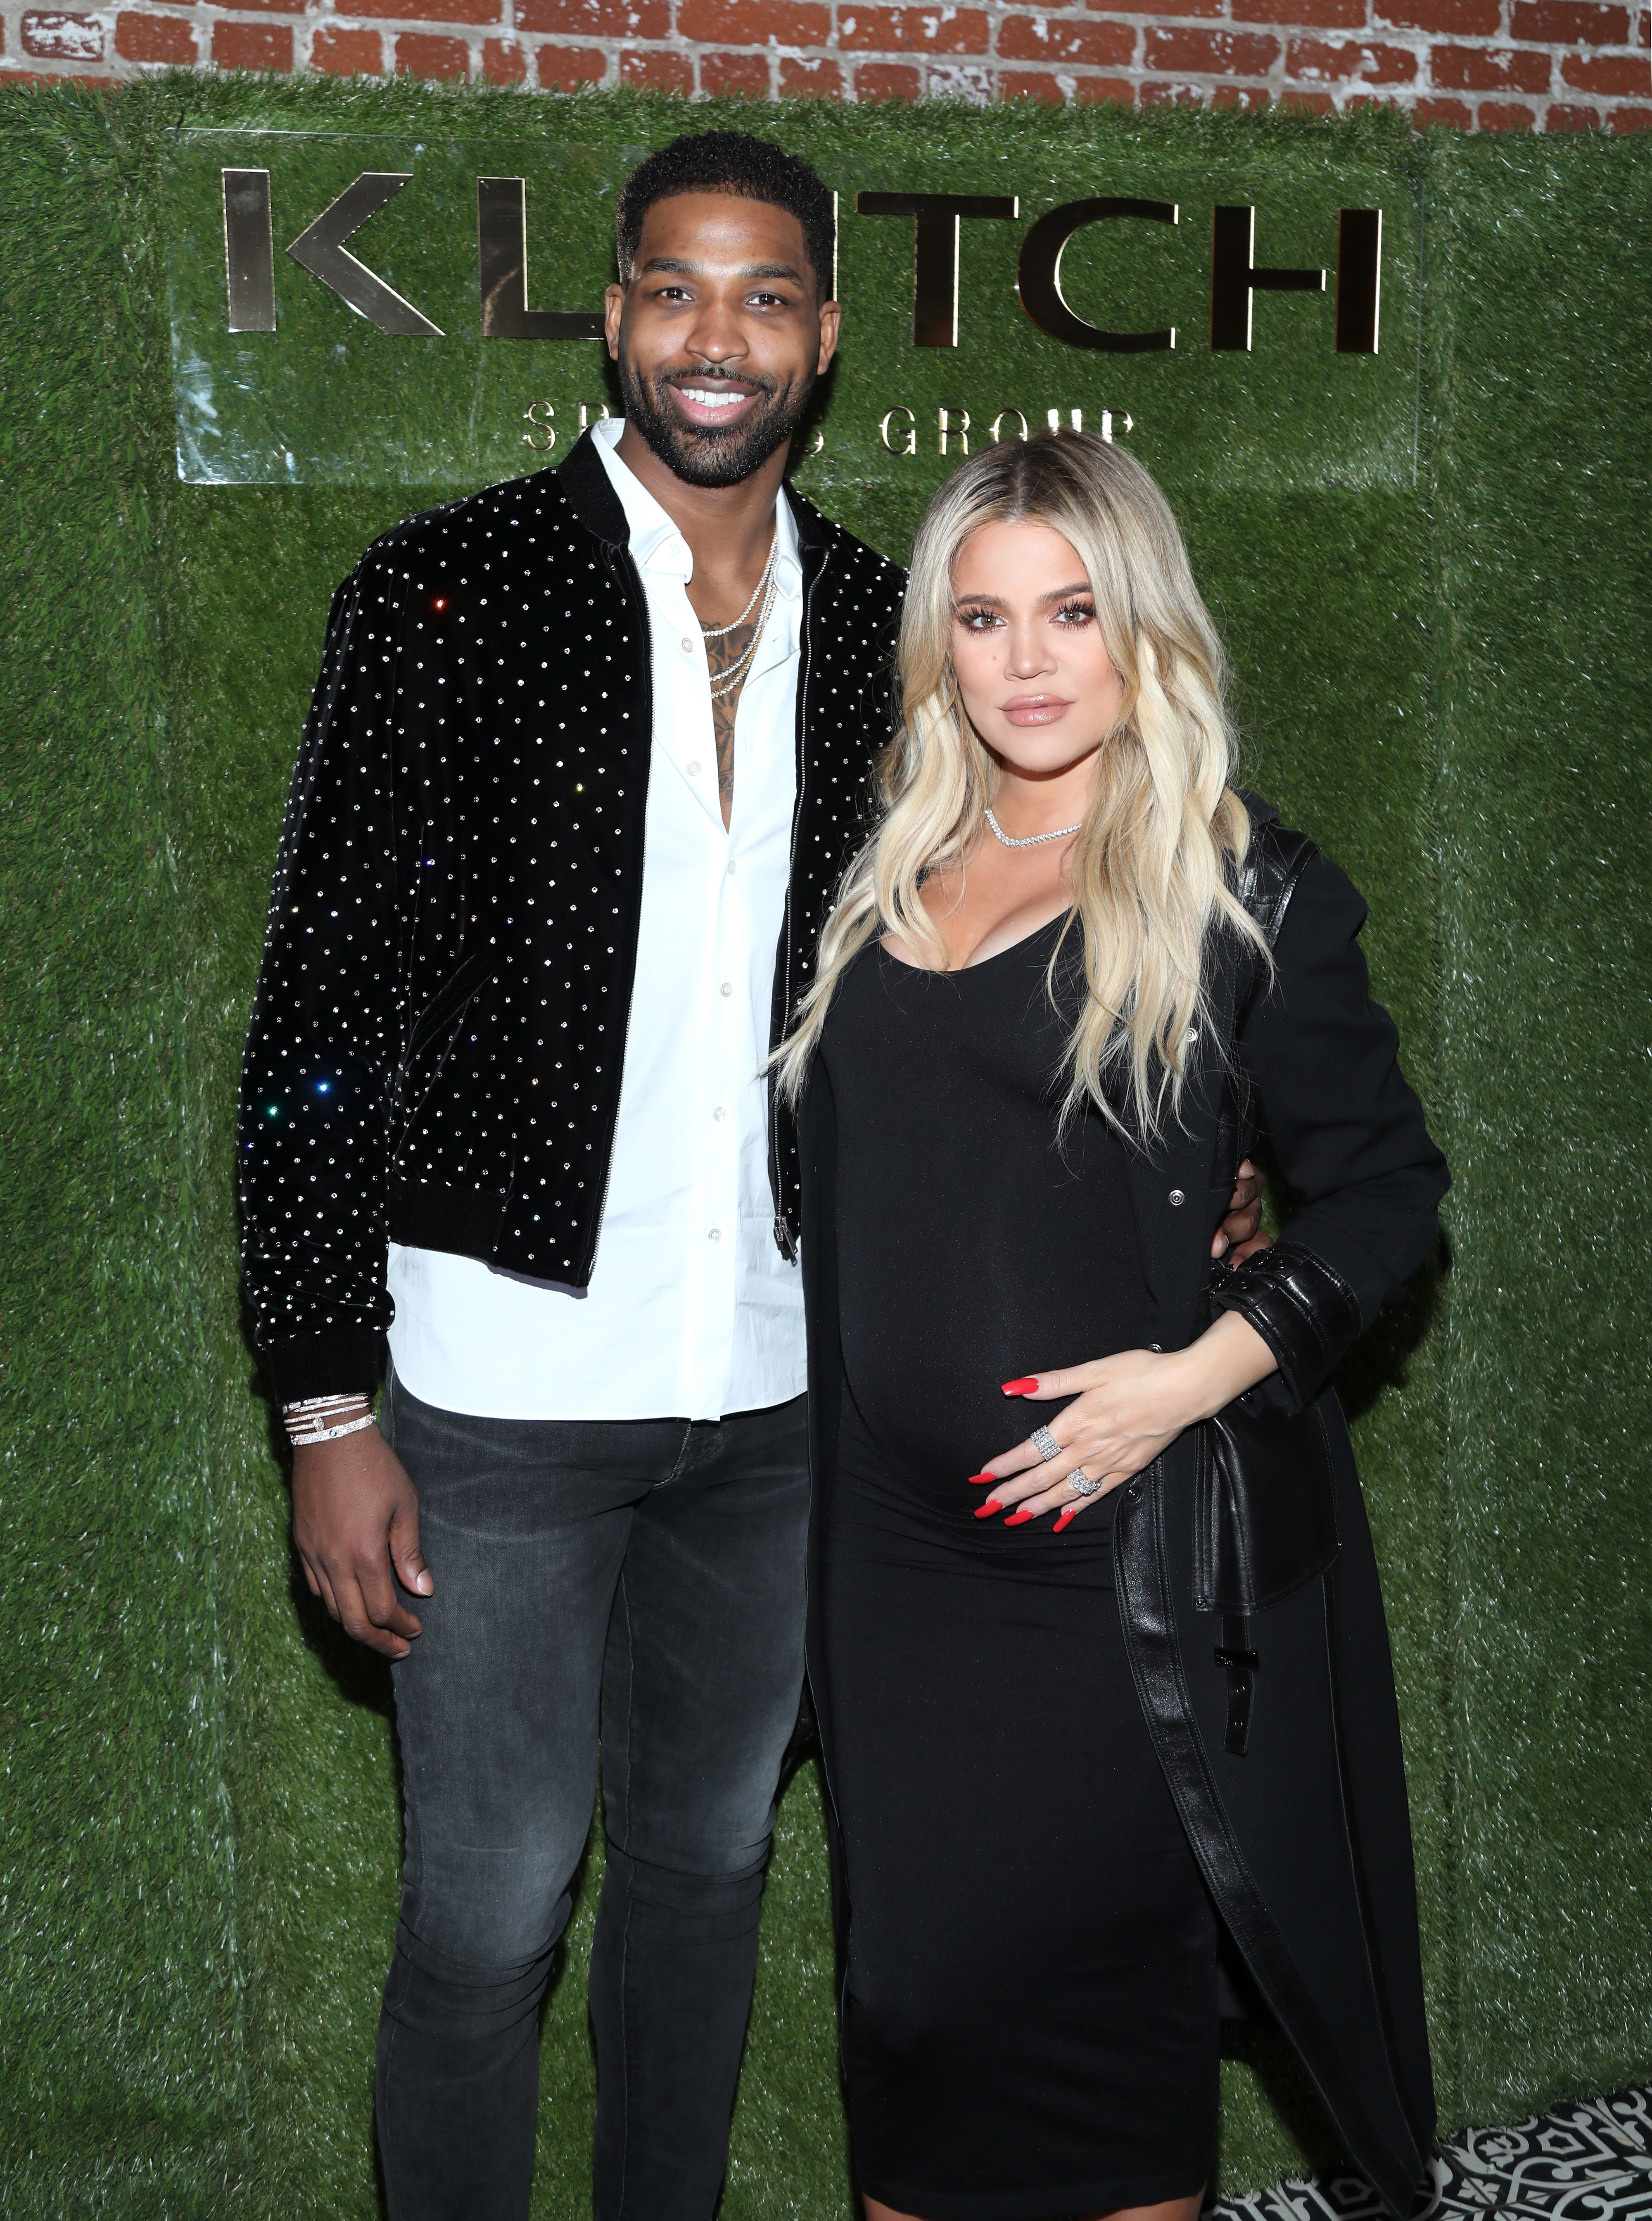 khloe and tristan when khloe was pregnant